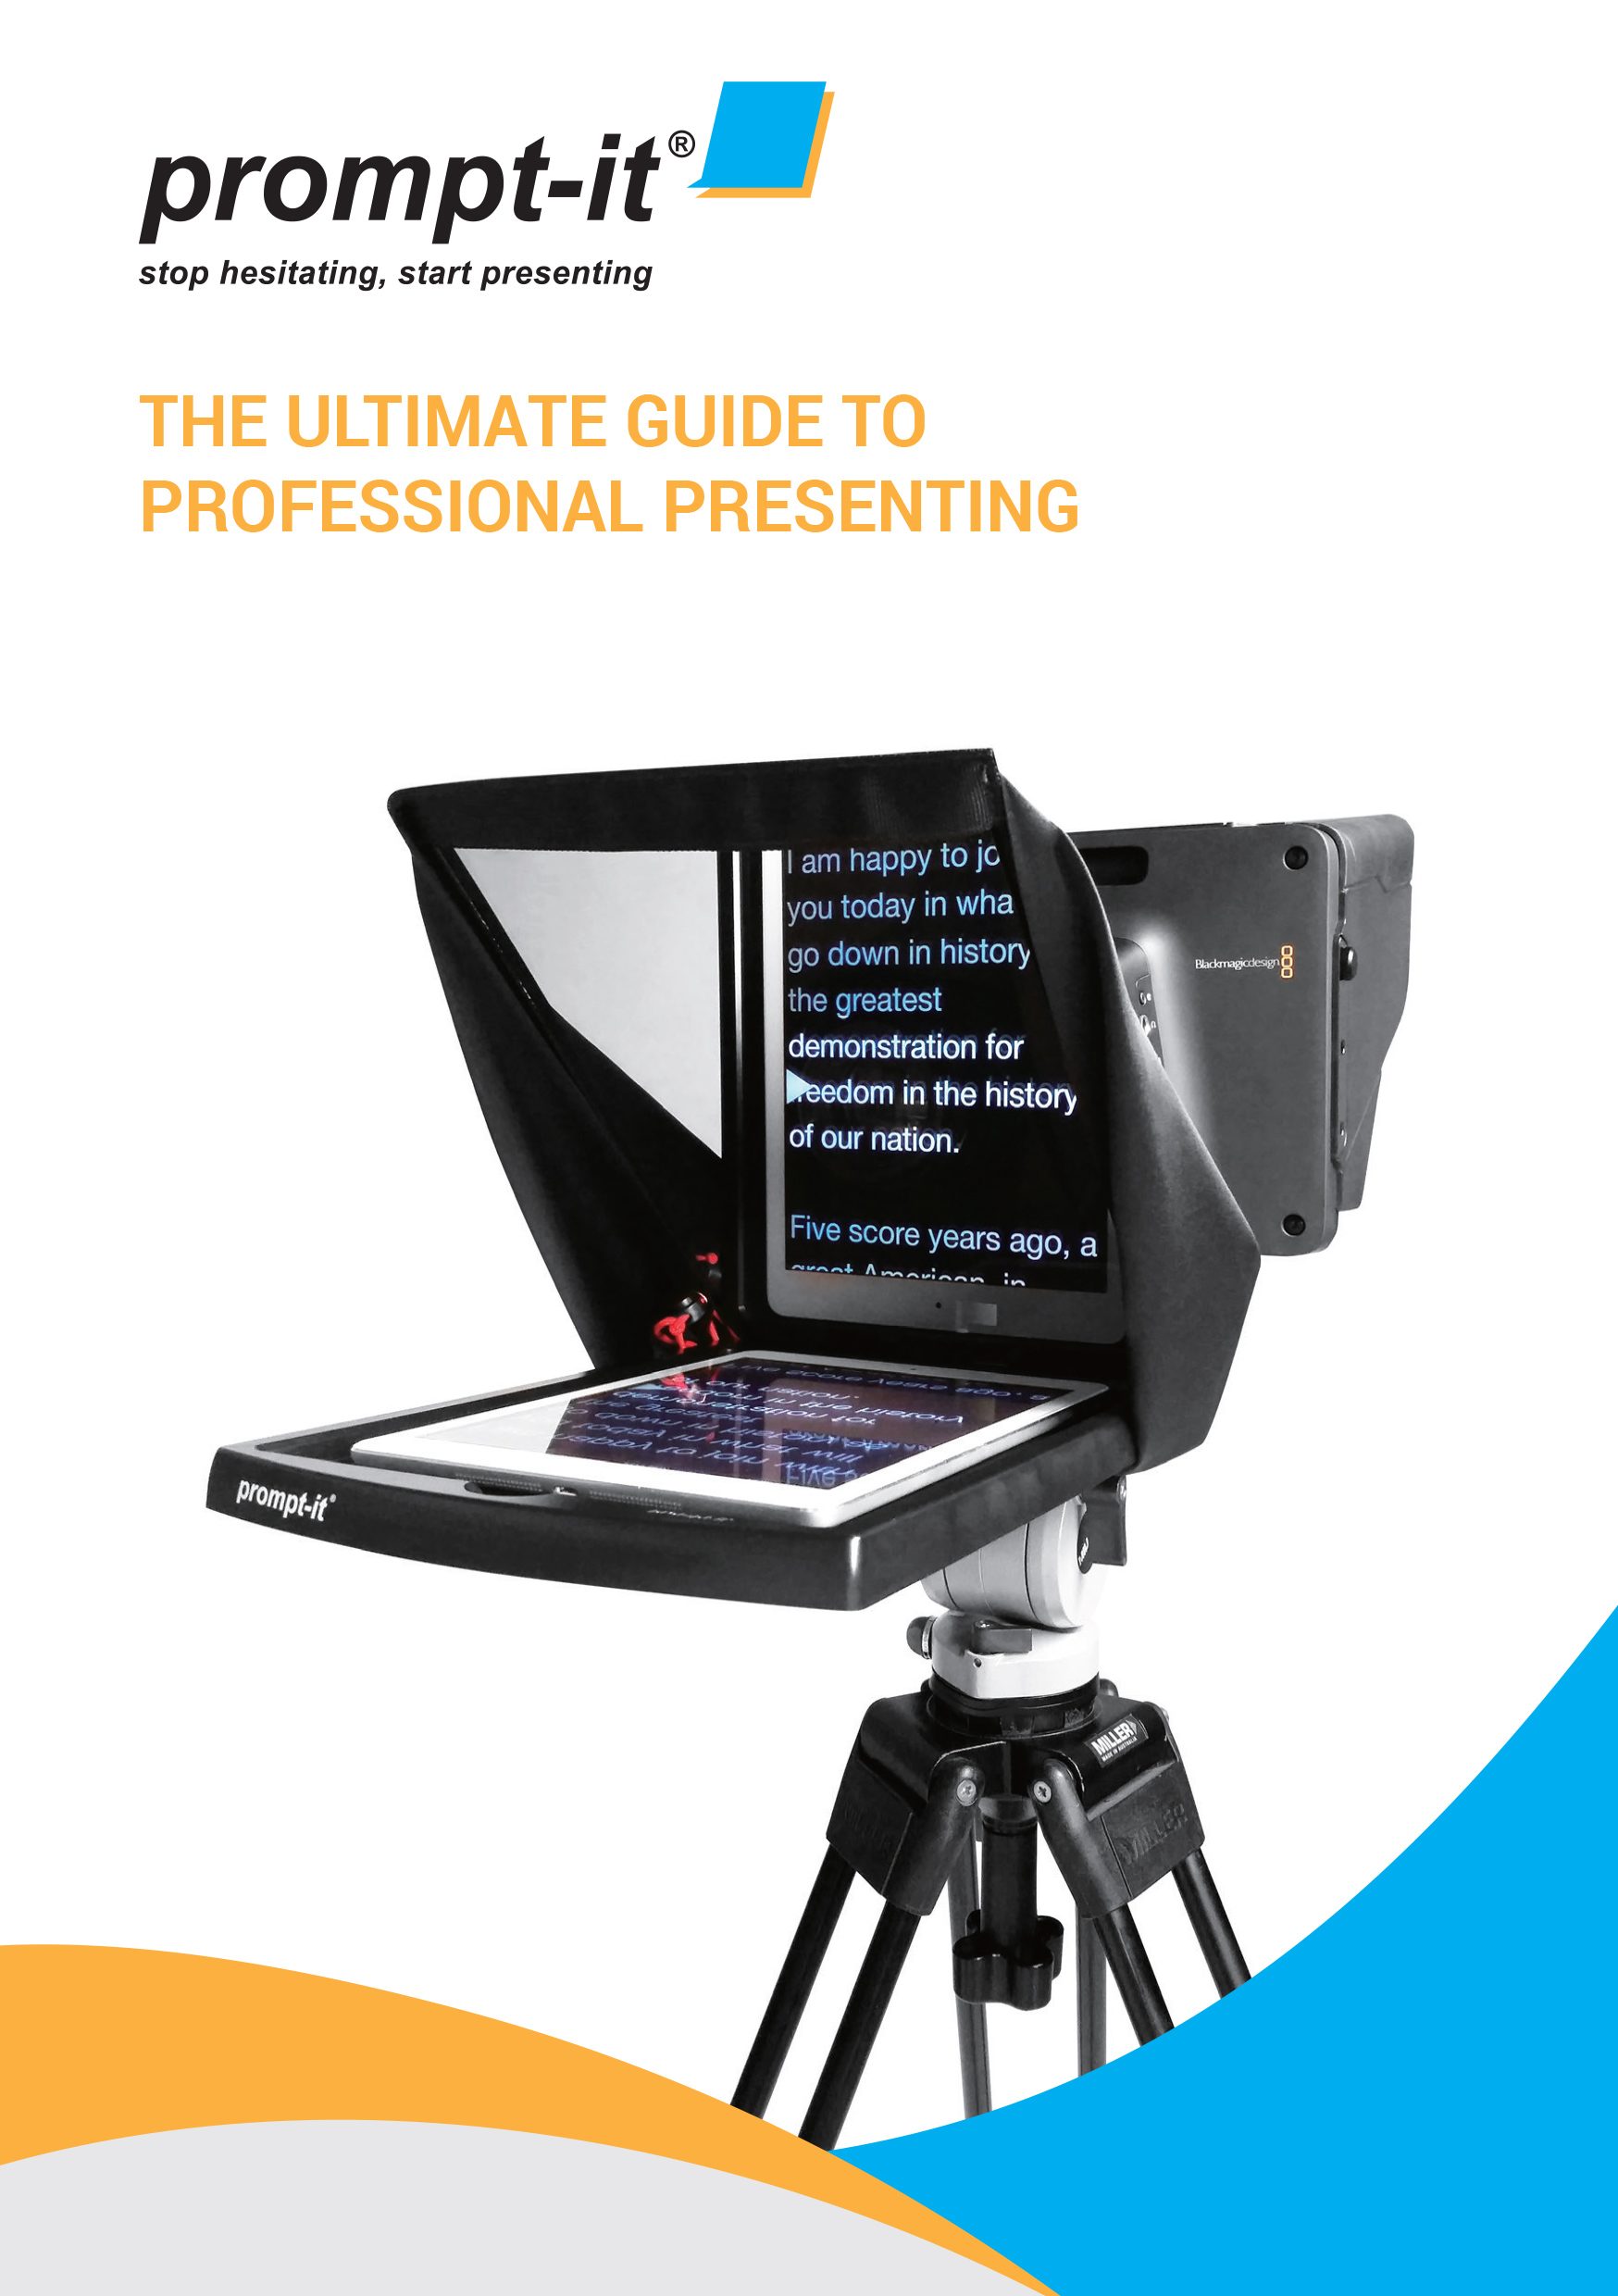 The Ultimate Guide to Professional Presenting